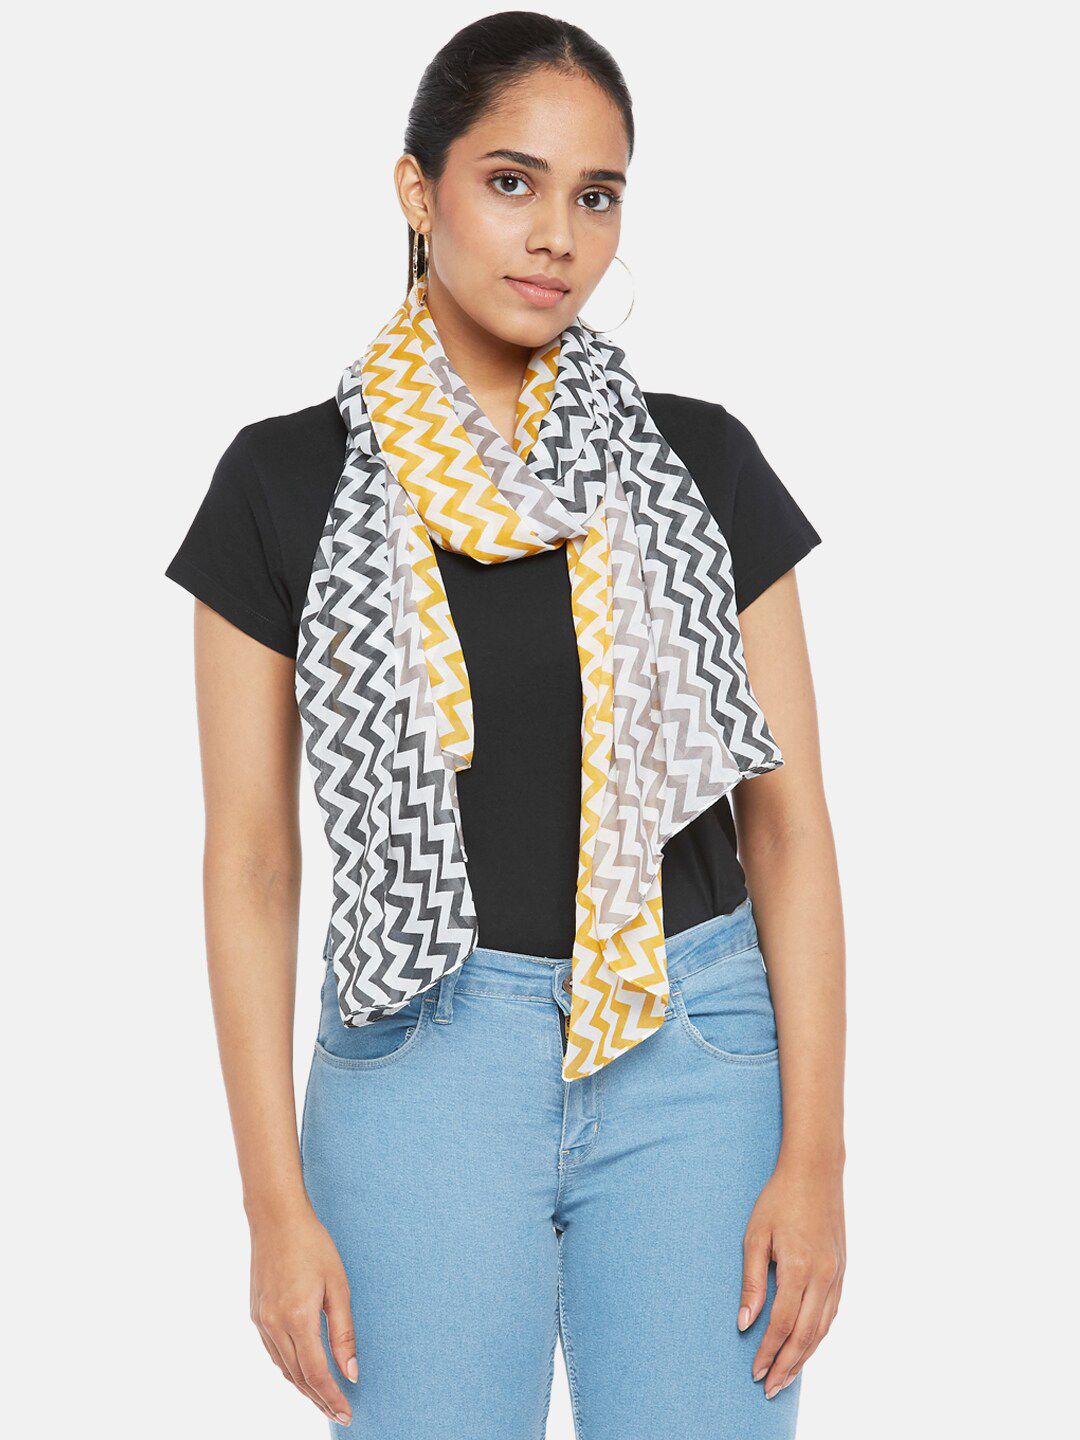 Honey by Pantaloons Women Yellow & Black Printed Scarf Price in India